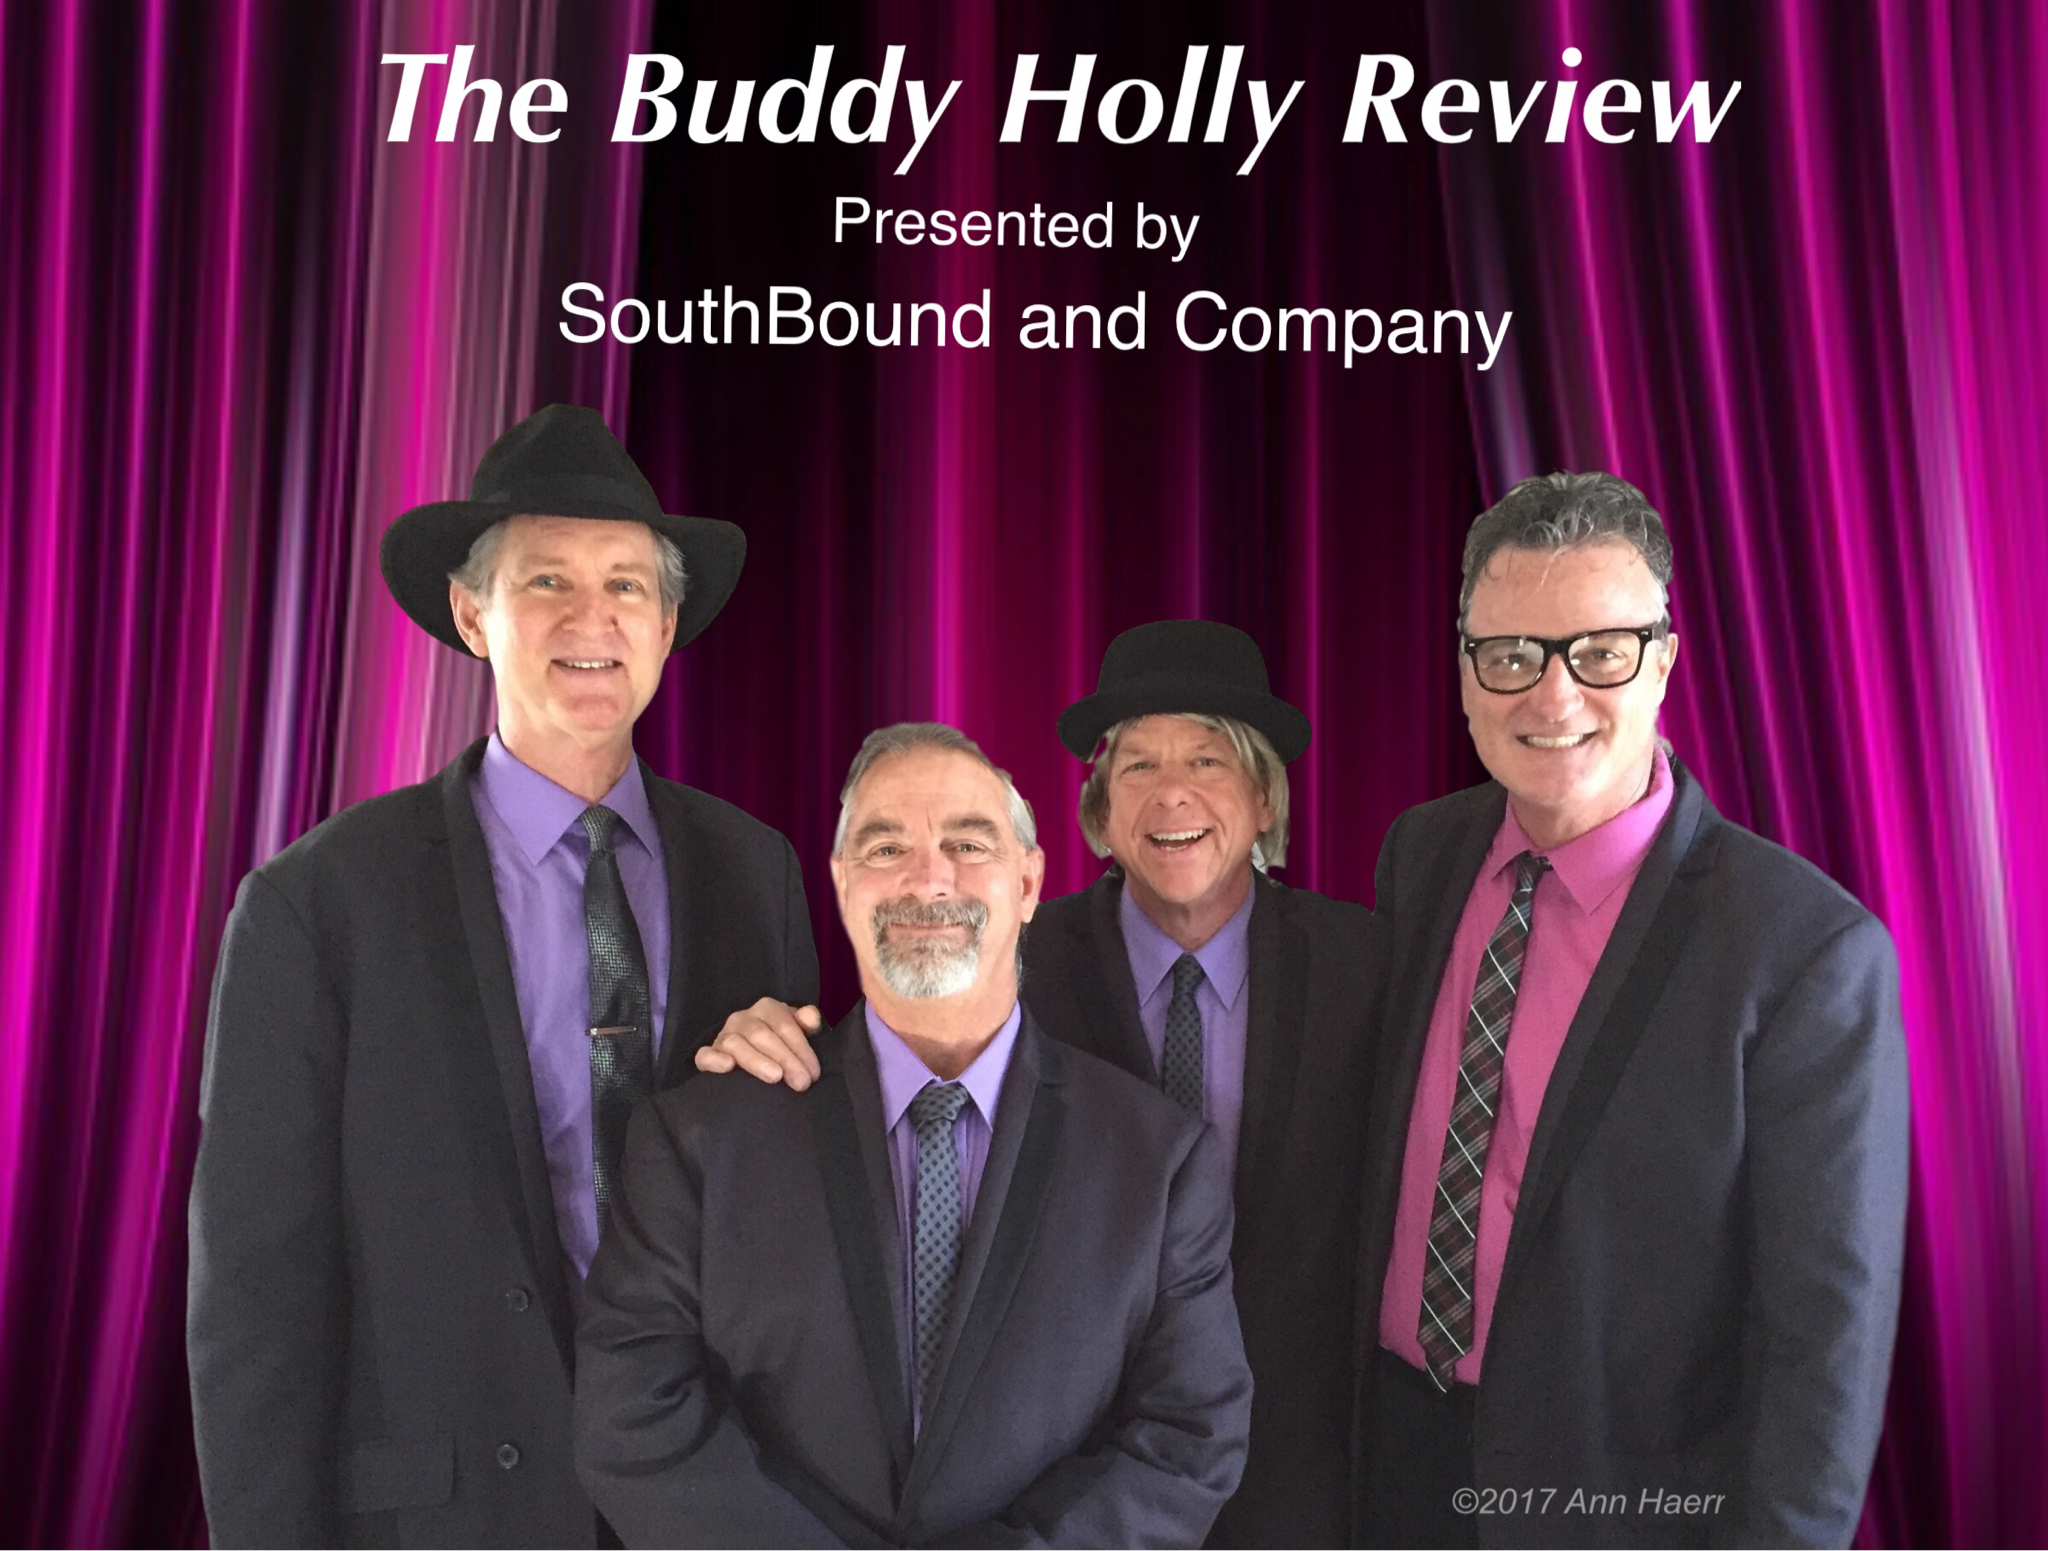 The Buddy Holly Review